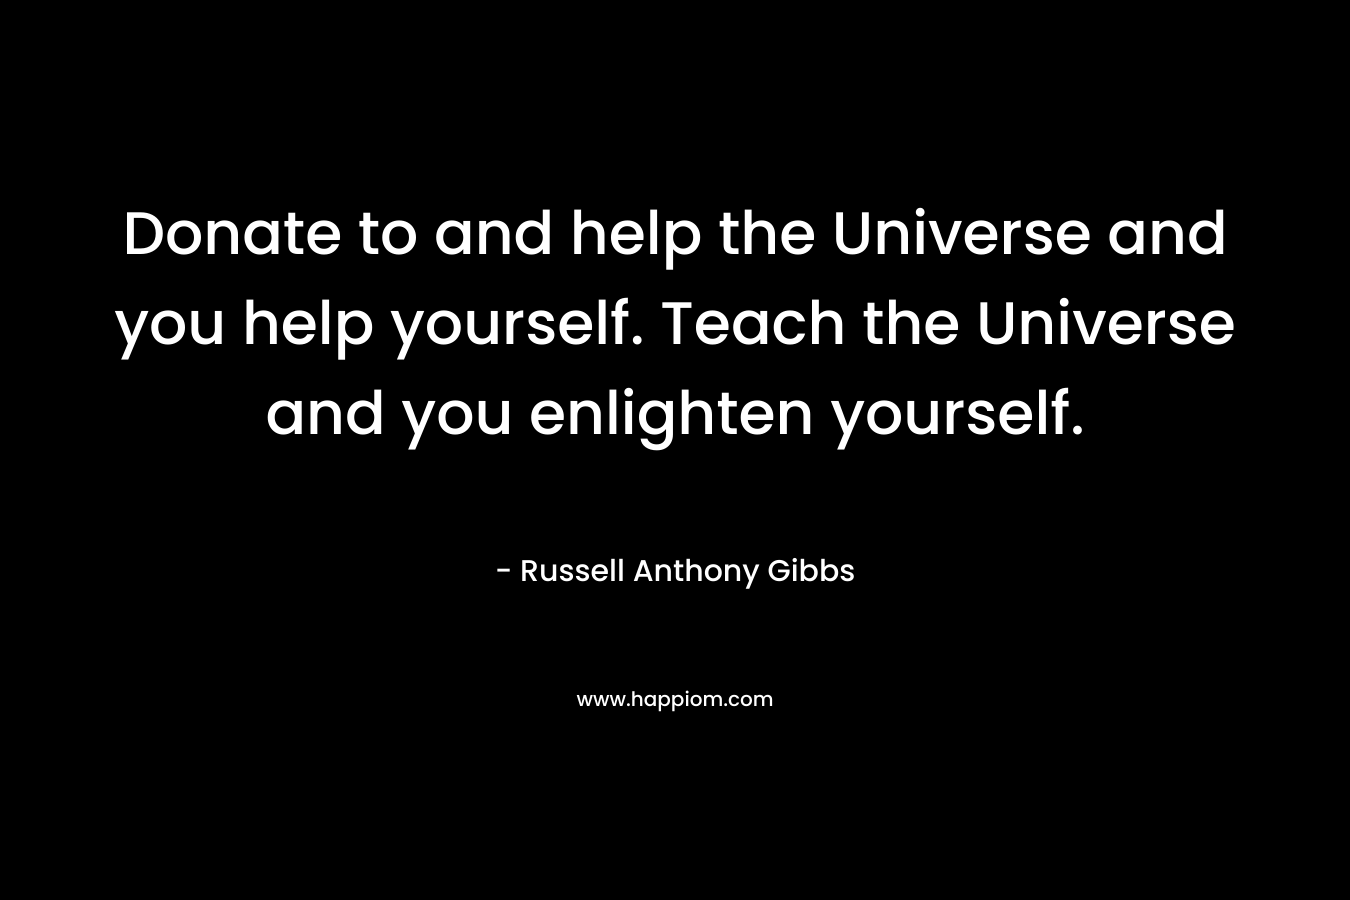 Donate to and help the Universe and you help yourself. Teach the Universe and you enlighten yourself. – Russell Anthony Gibbs